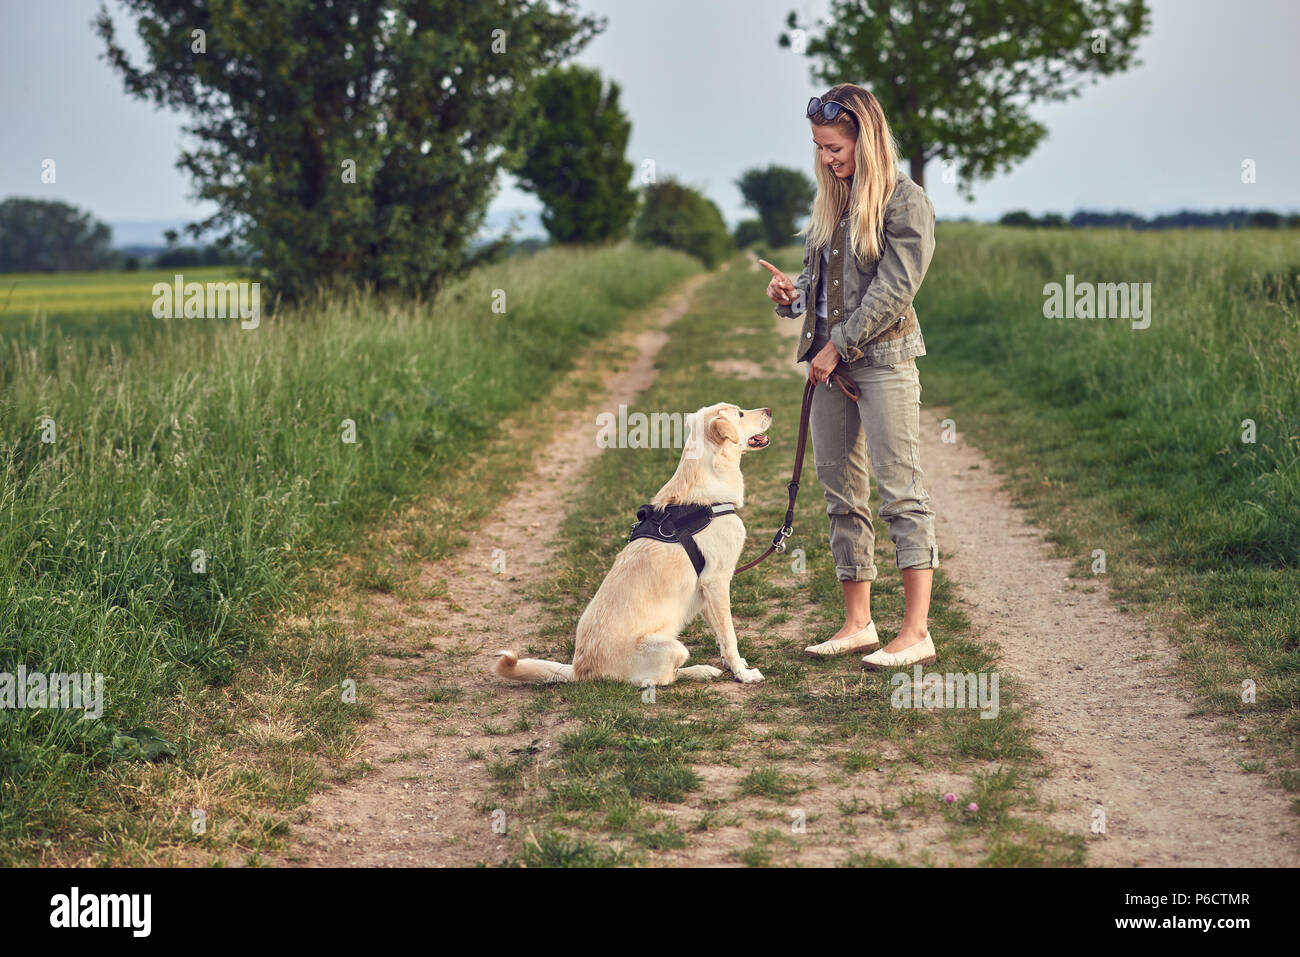 Attractive young woman teaching her dog to an obedient golden Labrador on a walking harness and lead in a country landscape on a farm track Stock Photo